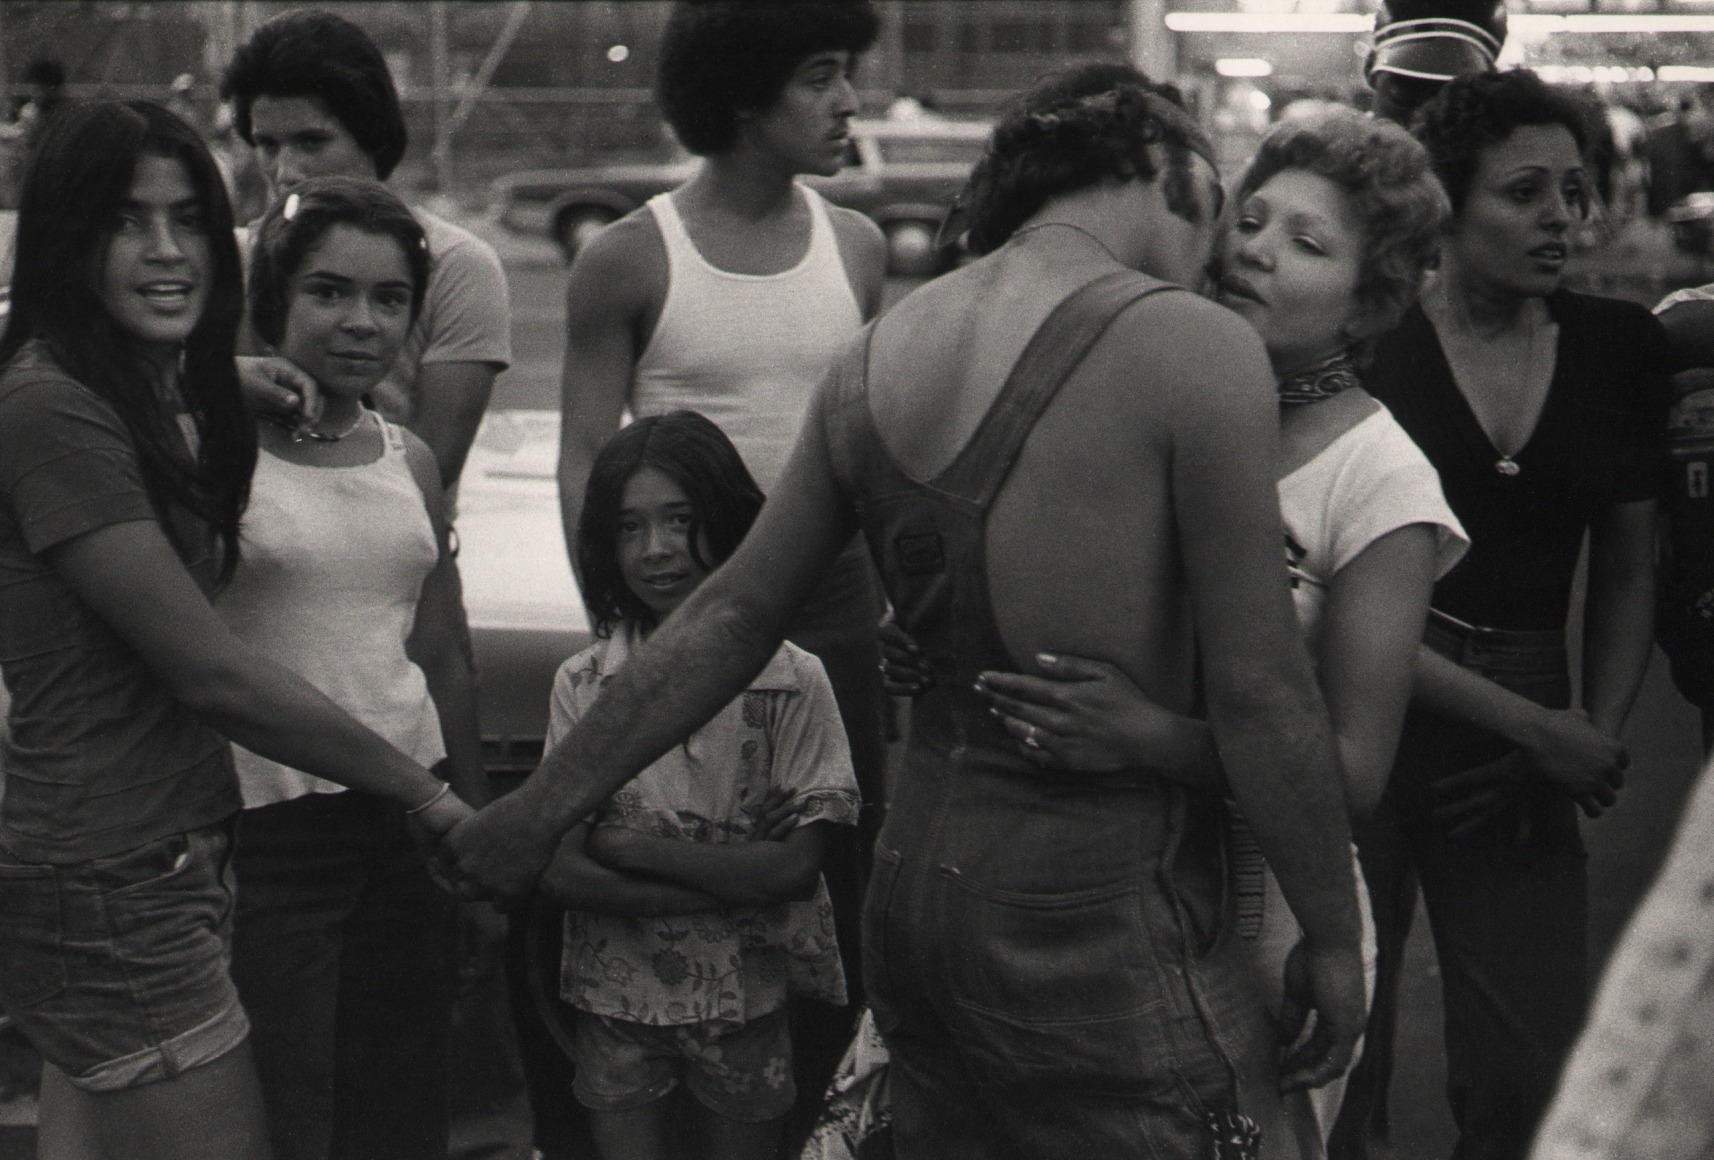 12. Anthony Barboza, Coney Island, NY, 1970s. Crowd of people. Central figure is a man in overalls with back to the camera. He holds one woman's hand while embracing another.